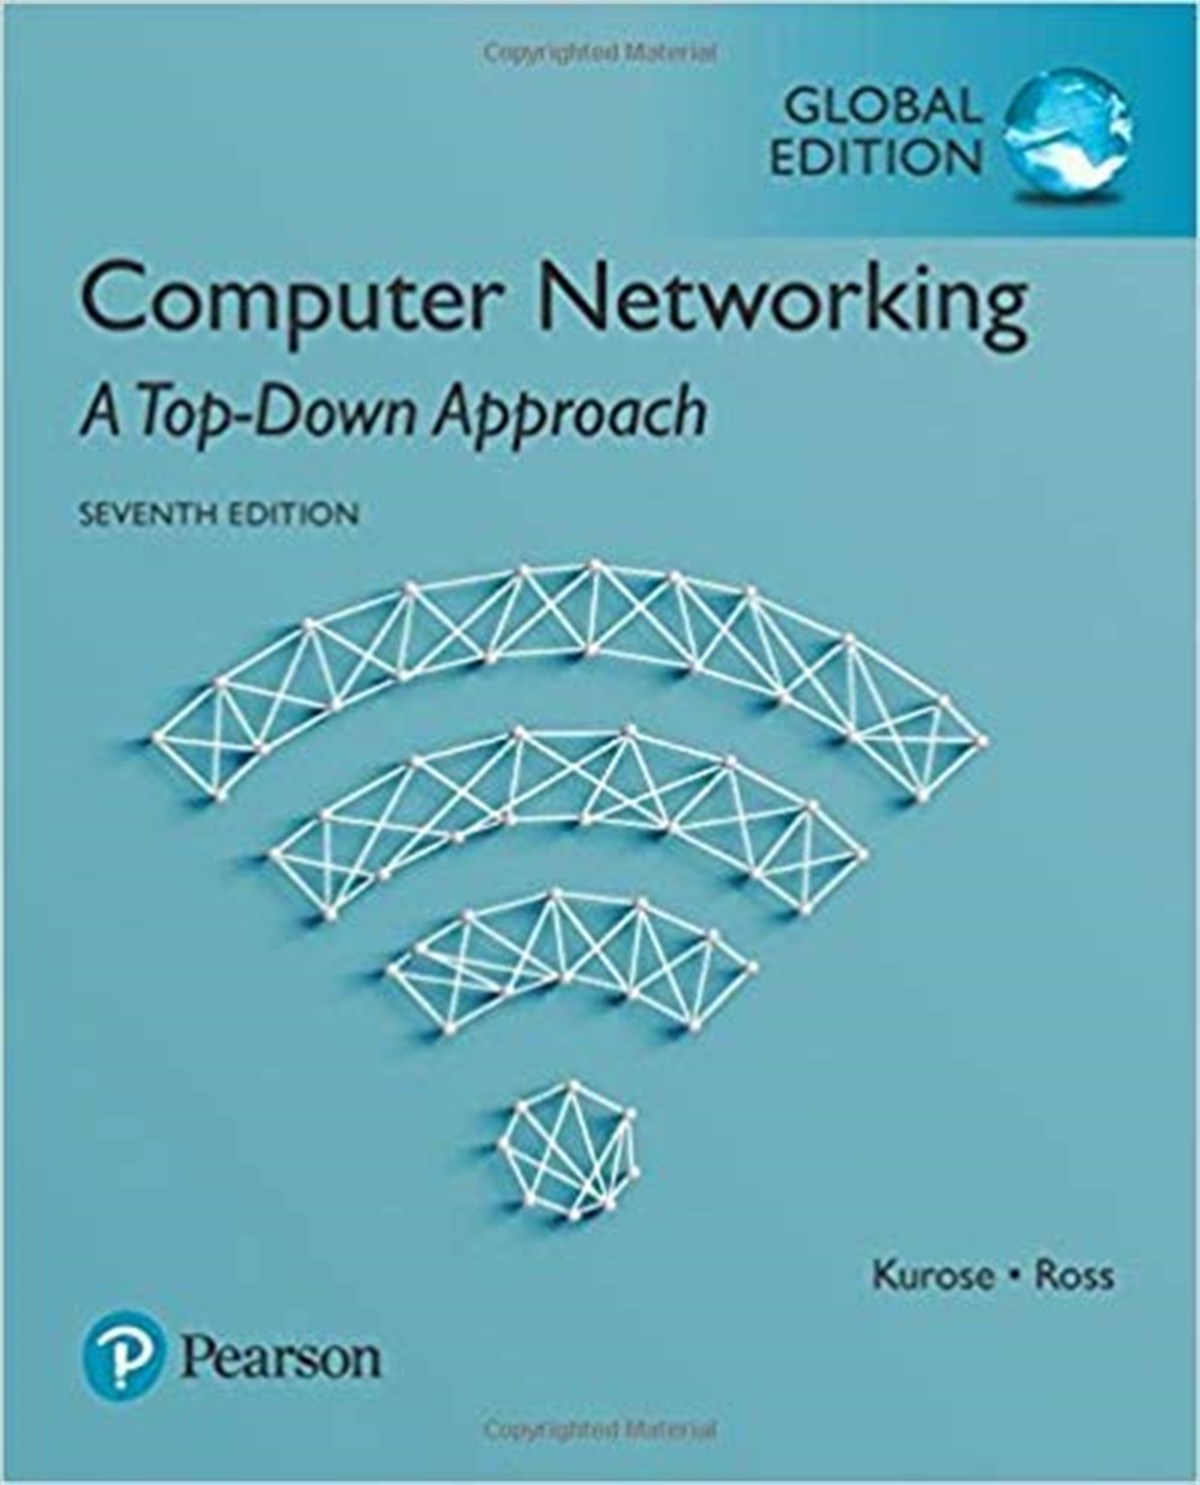 Computer Networking A Top-Down Approach, 7th Ed.